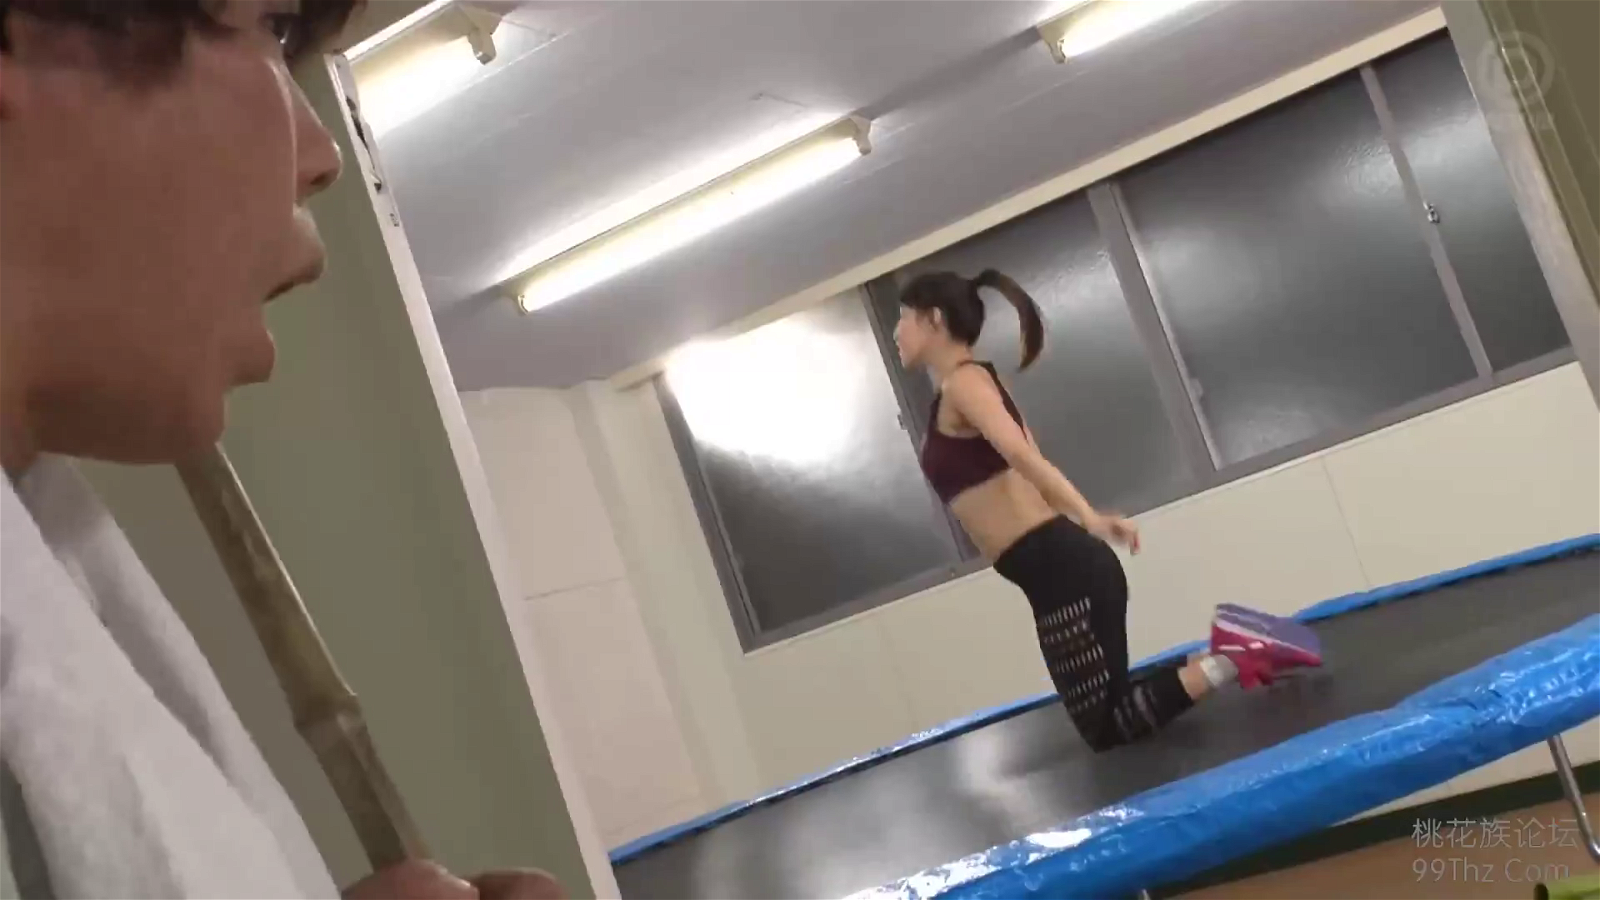 Shared Video by Succubus Queen with the username @Lucasdu,  October 15, 2022 at 7:38 AM and the text says 'lol all kinds of ways to use the trampoline 🤣'